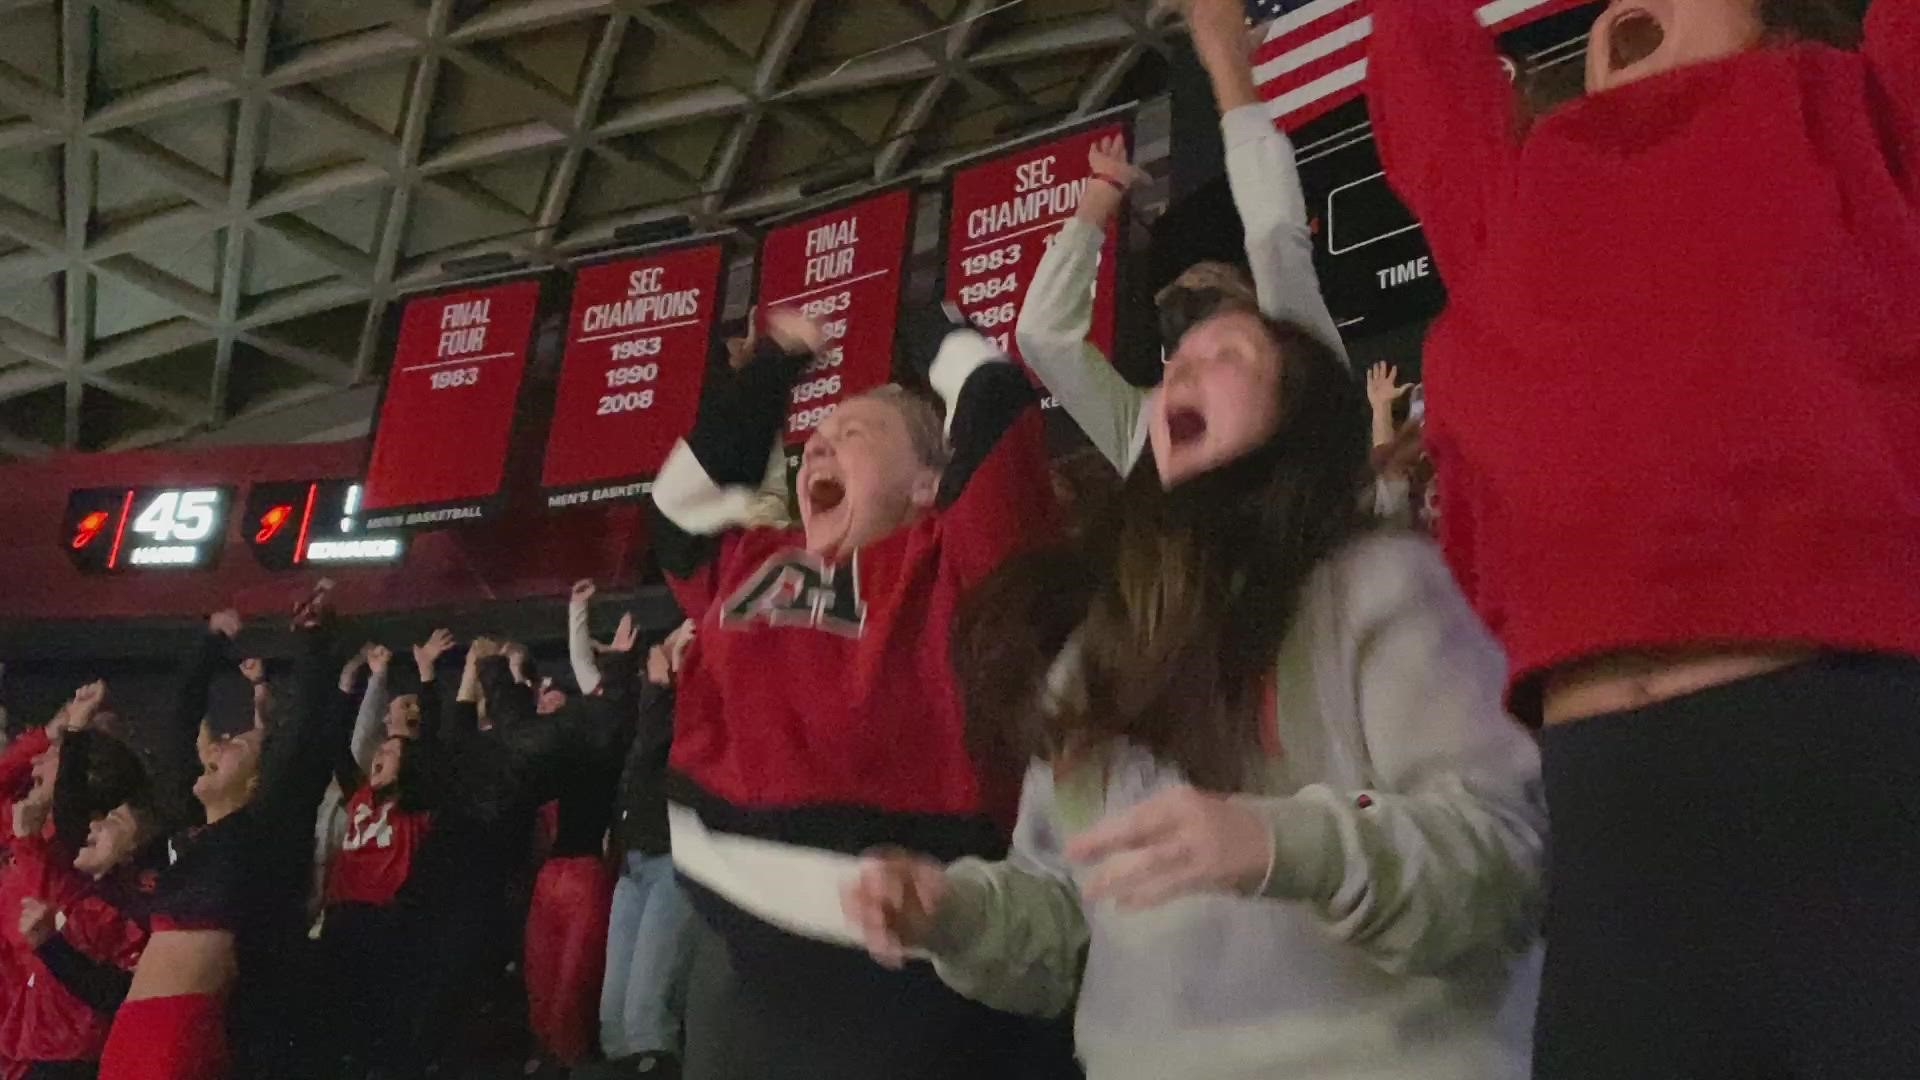 Students gathered at UGA's Stegeman Coliseum erupted into cheers watching the Bulldogs play in the SEC National Championship.